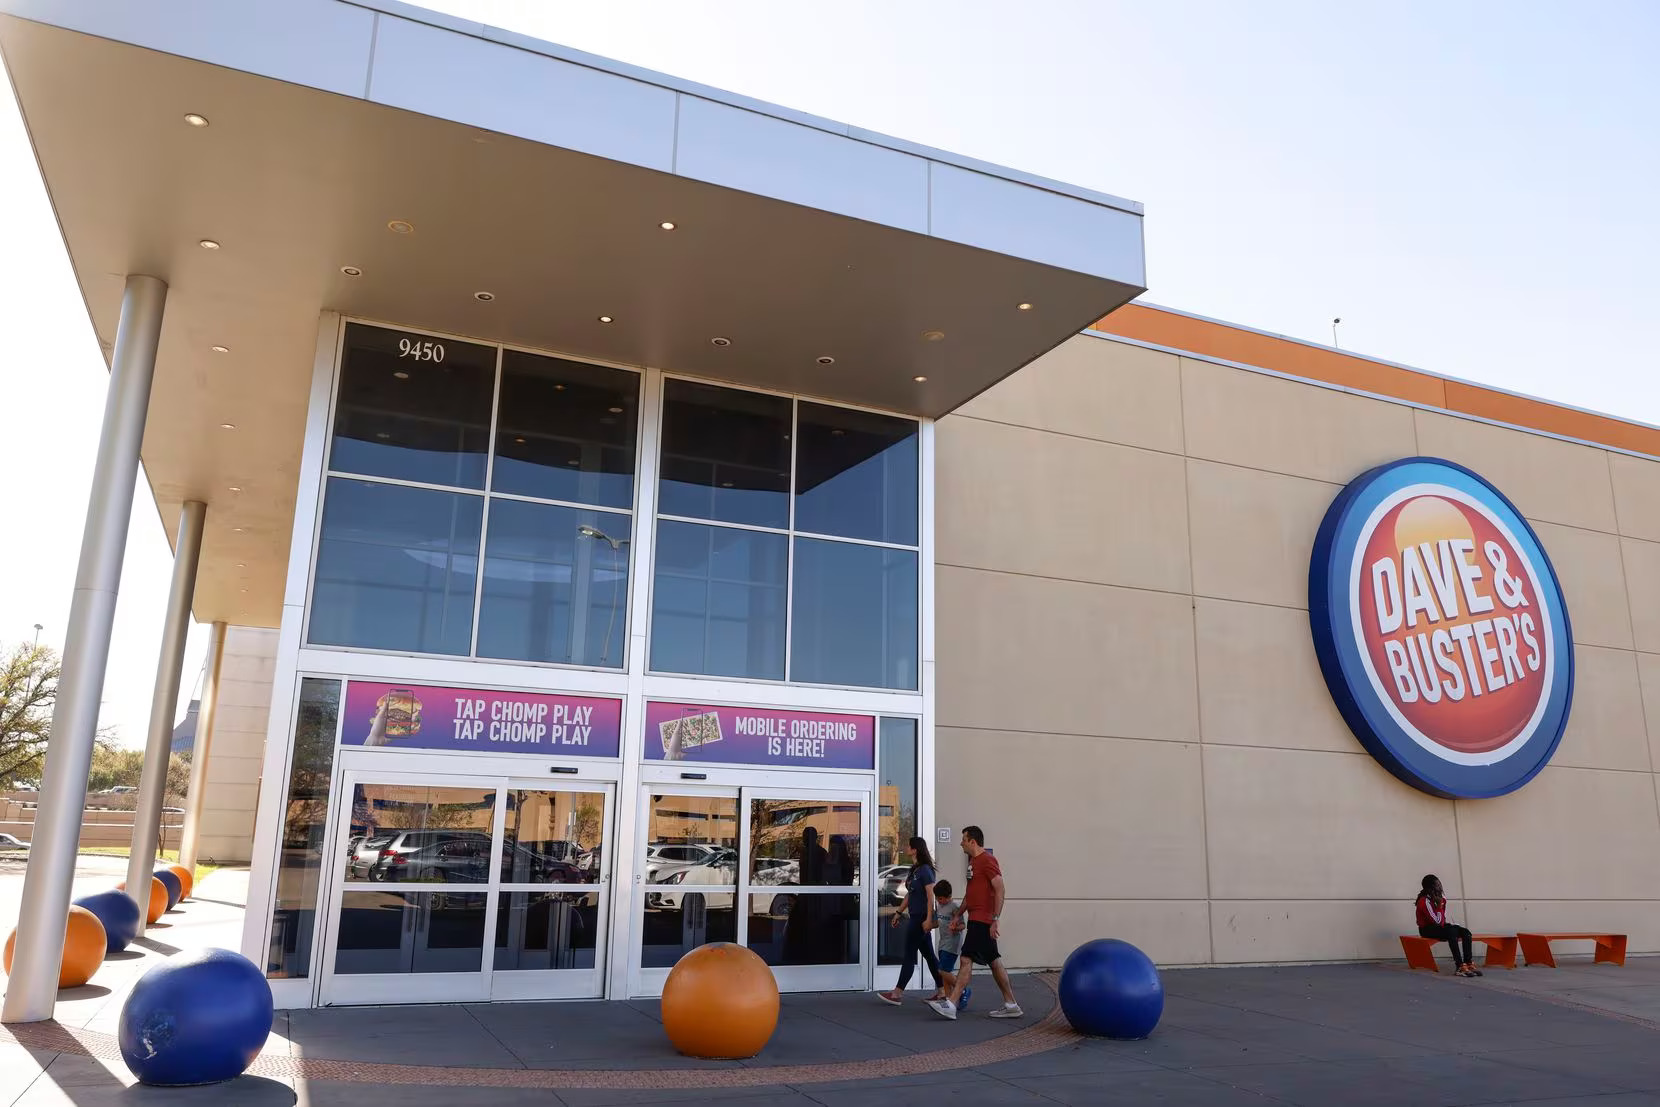 Dave & Buster’s lowers interest rates along with other companies on sub-investment-grade debt in response to market trends. 

Image Source: The Dallas Morning News 